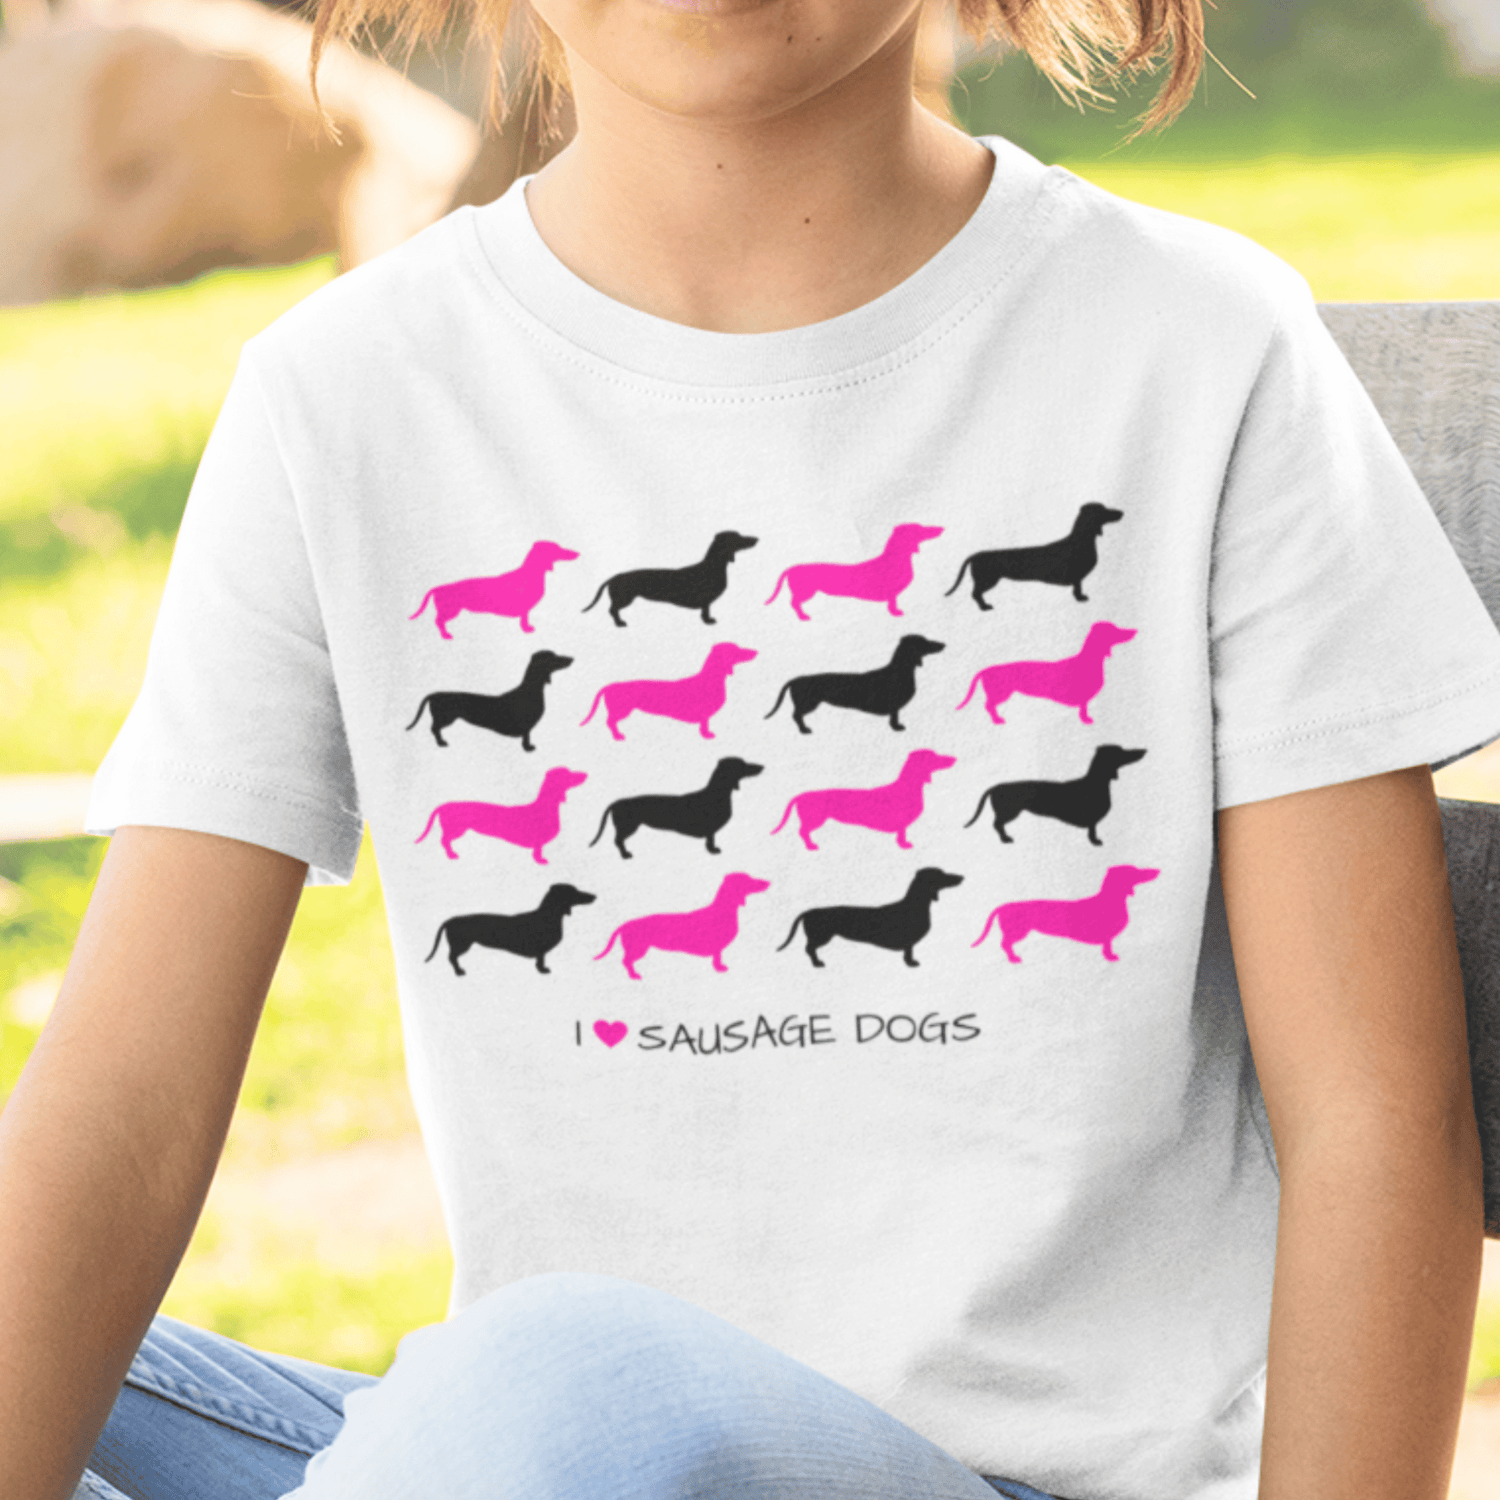 Girl wears white short sleeved t-shirt with black and pink Sausage Dogs